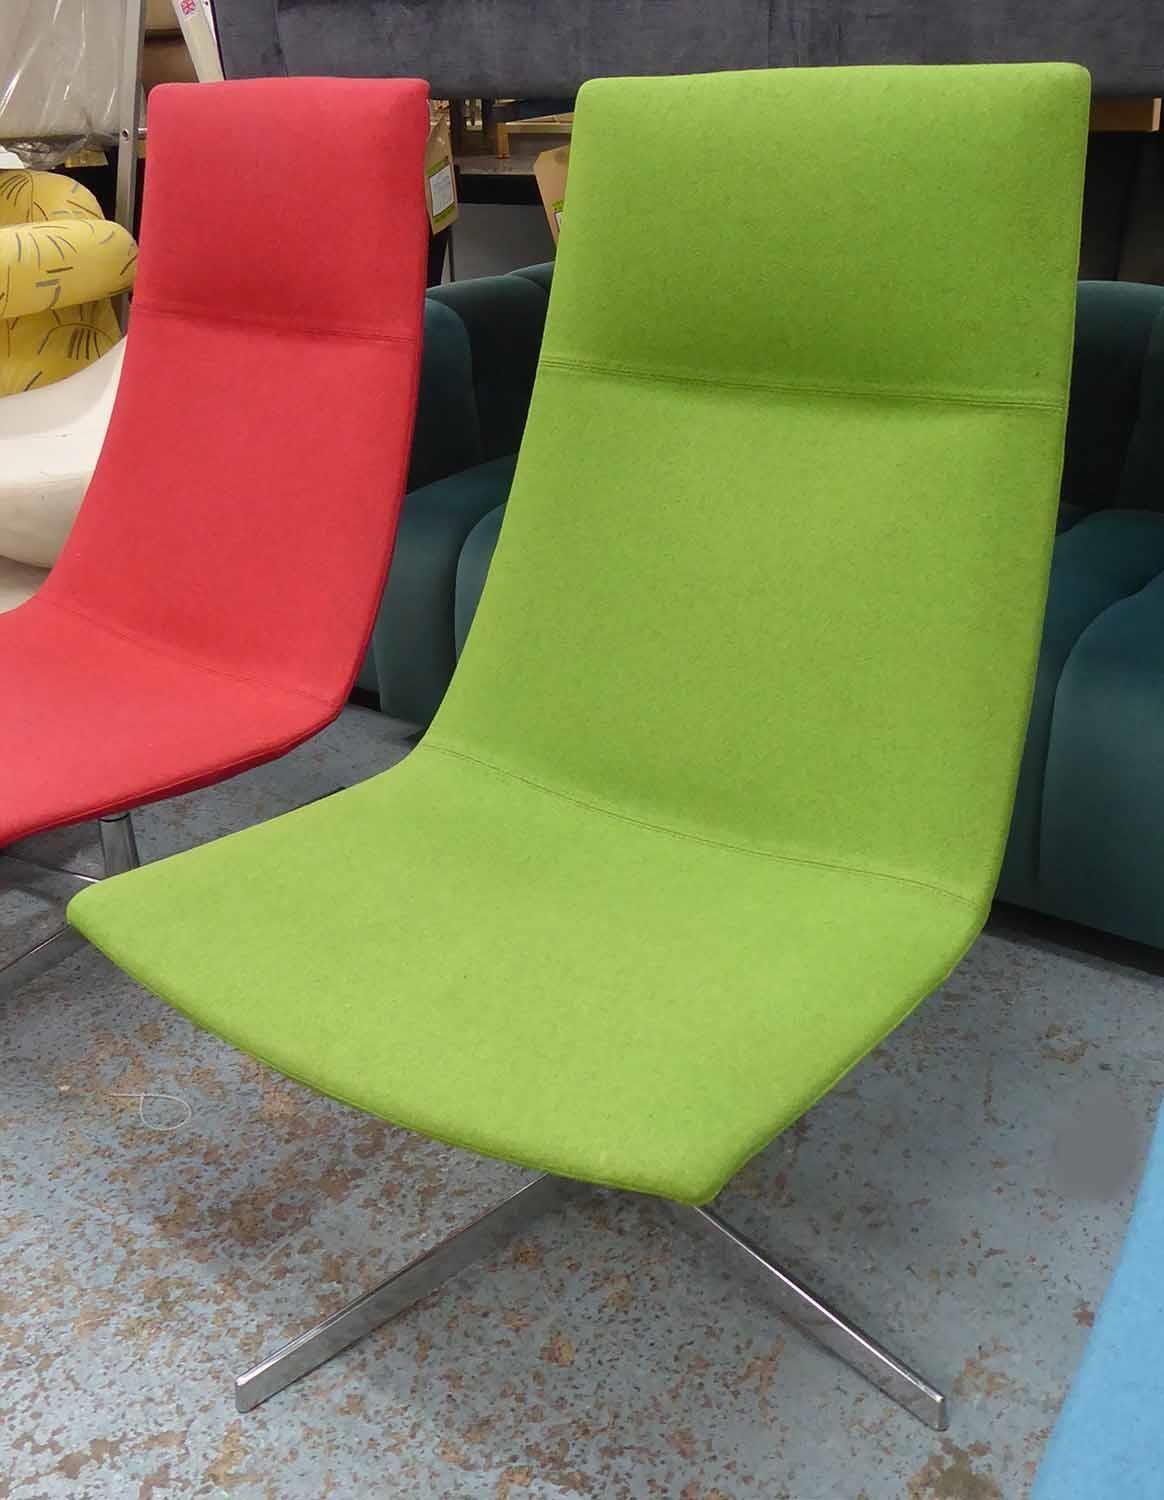 THREE ARPER CATIFA 70 LOUNGE CHAIRS, a set of three, by Alberto Lievore, Jeannette Altherr and